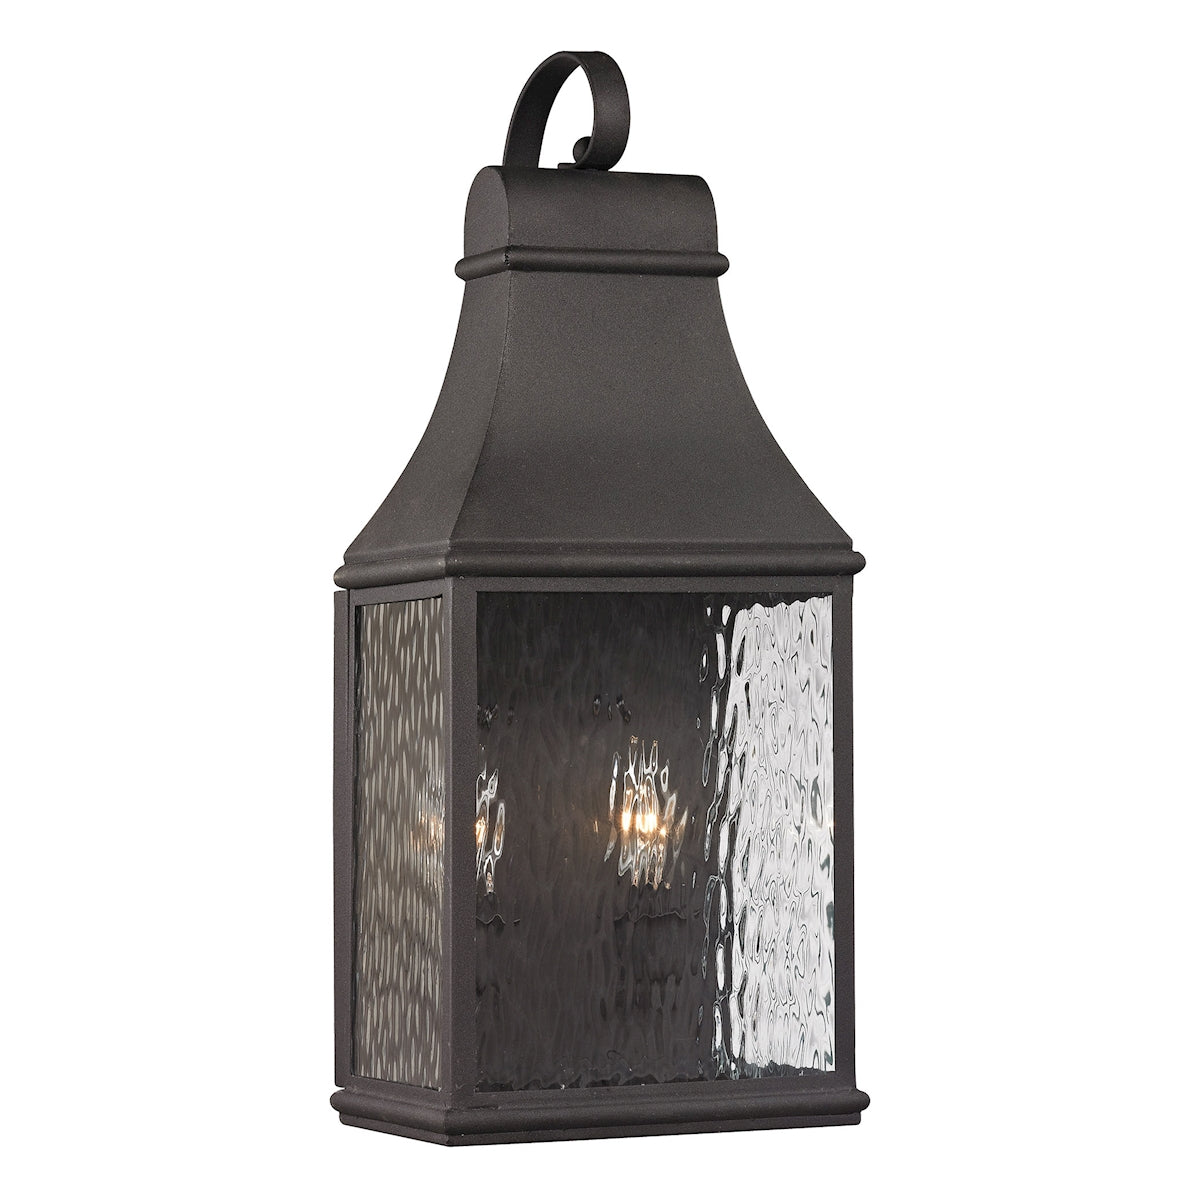 ELK Lighting 47071/2 - Forged Jefferson 7" Wide 2-Light Outdoor Wall Lamp in Charcoal